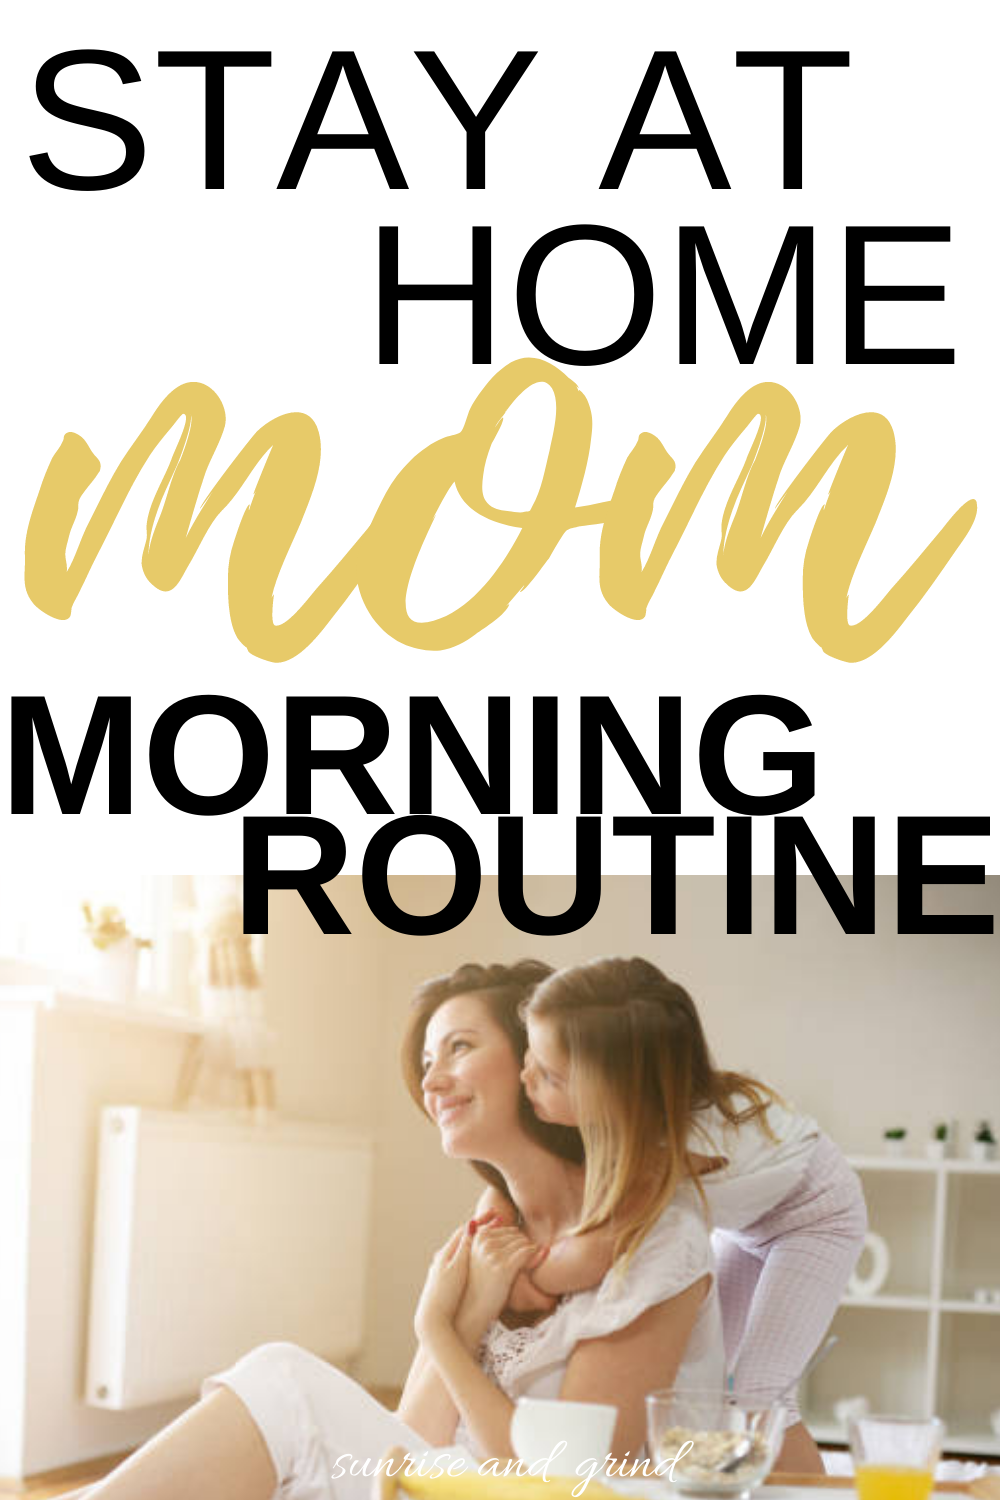 stay at home mom and daughter in morning